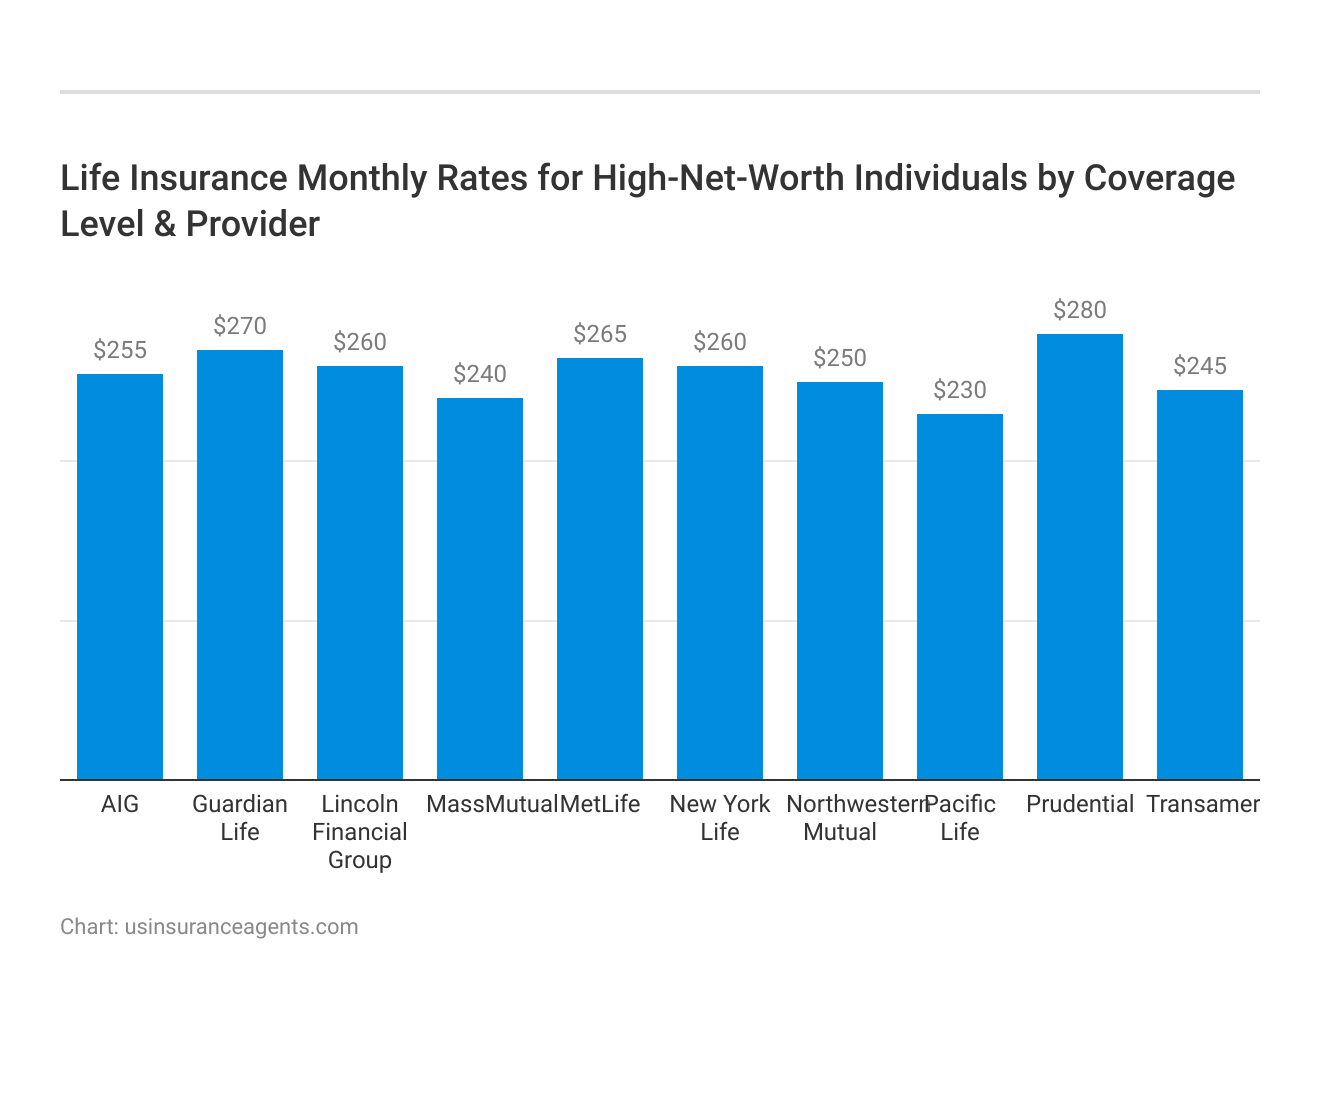 <h3>Life Insurance Monthly Rates for High-Net-Worth Individuals by Coverage Level & Provider</h3>